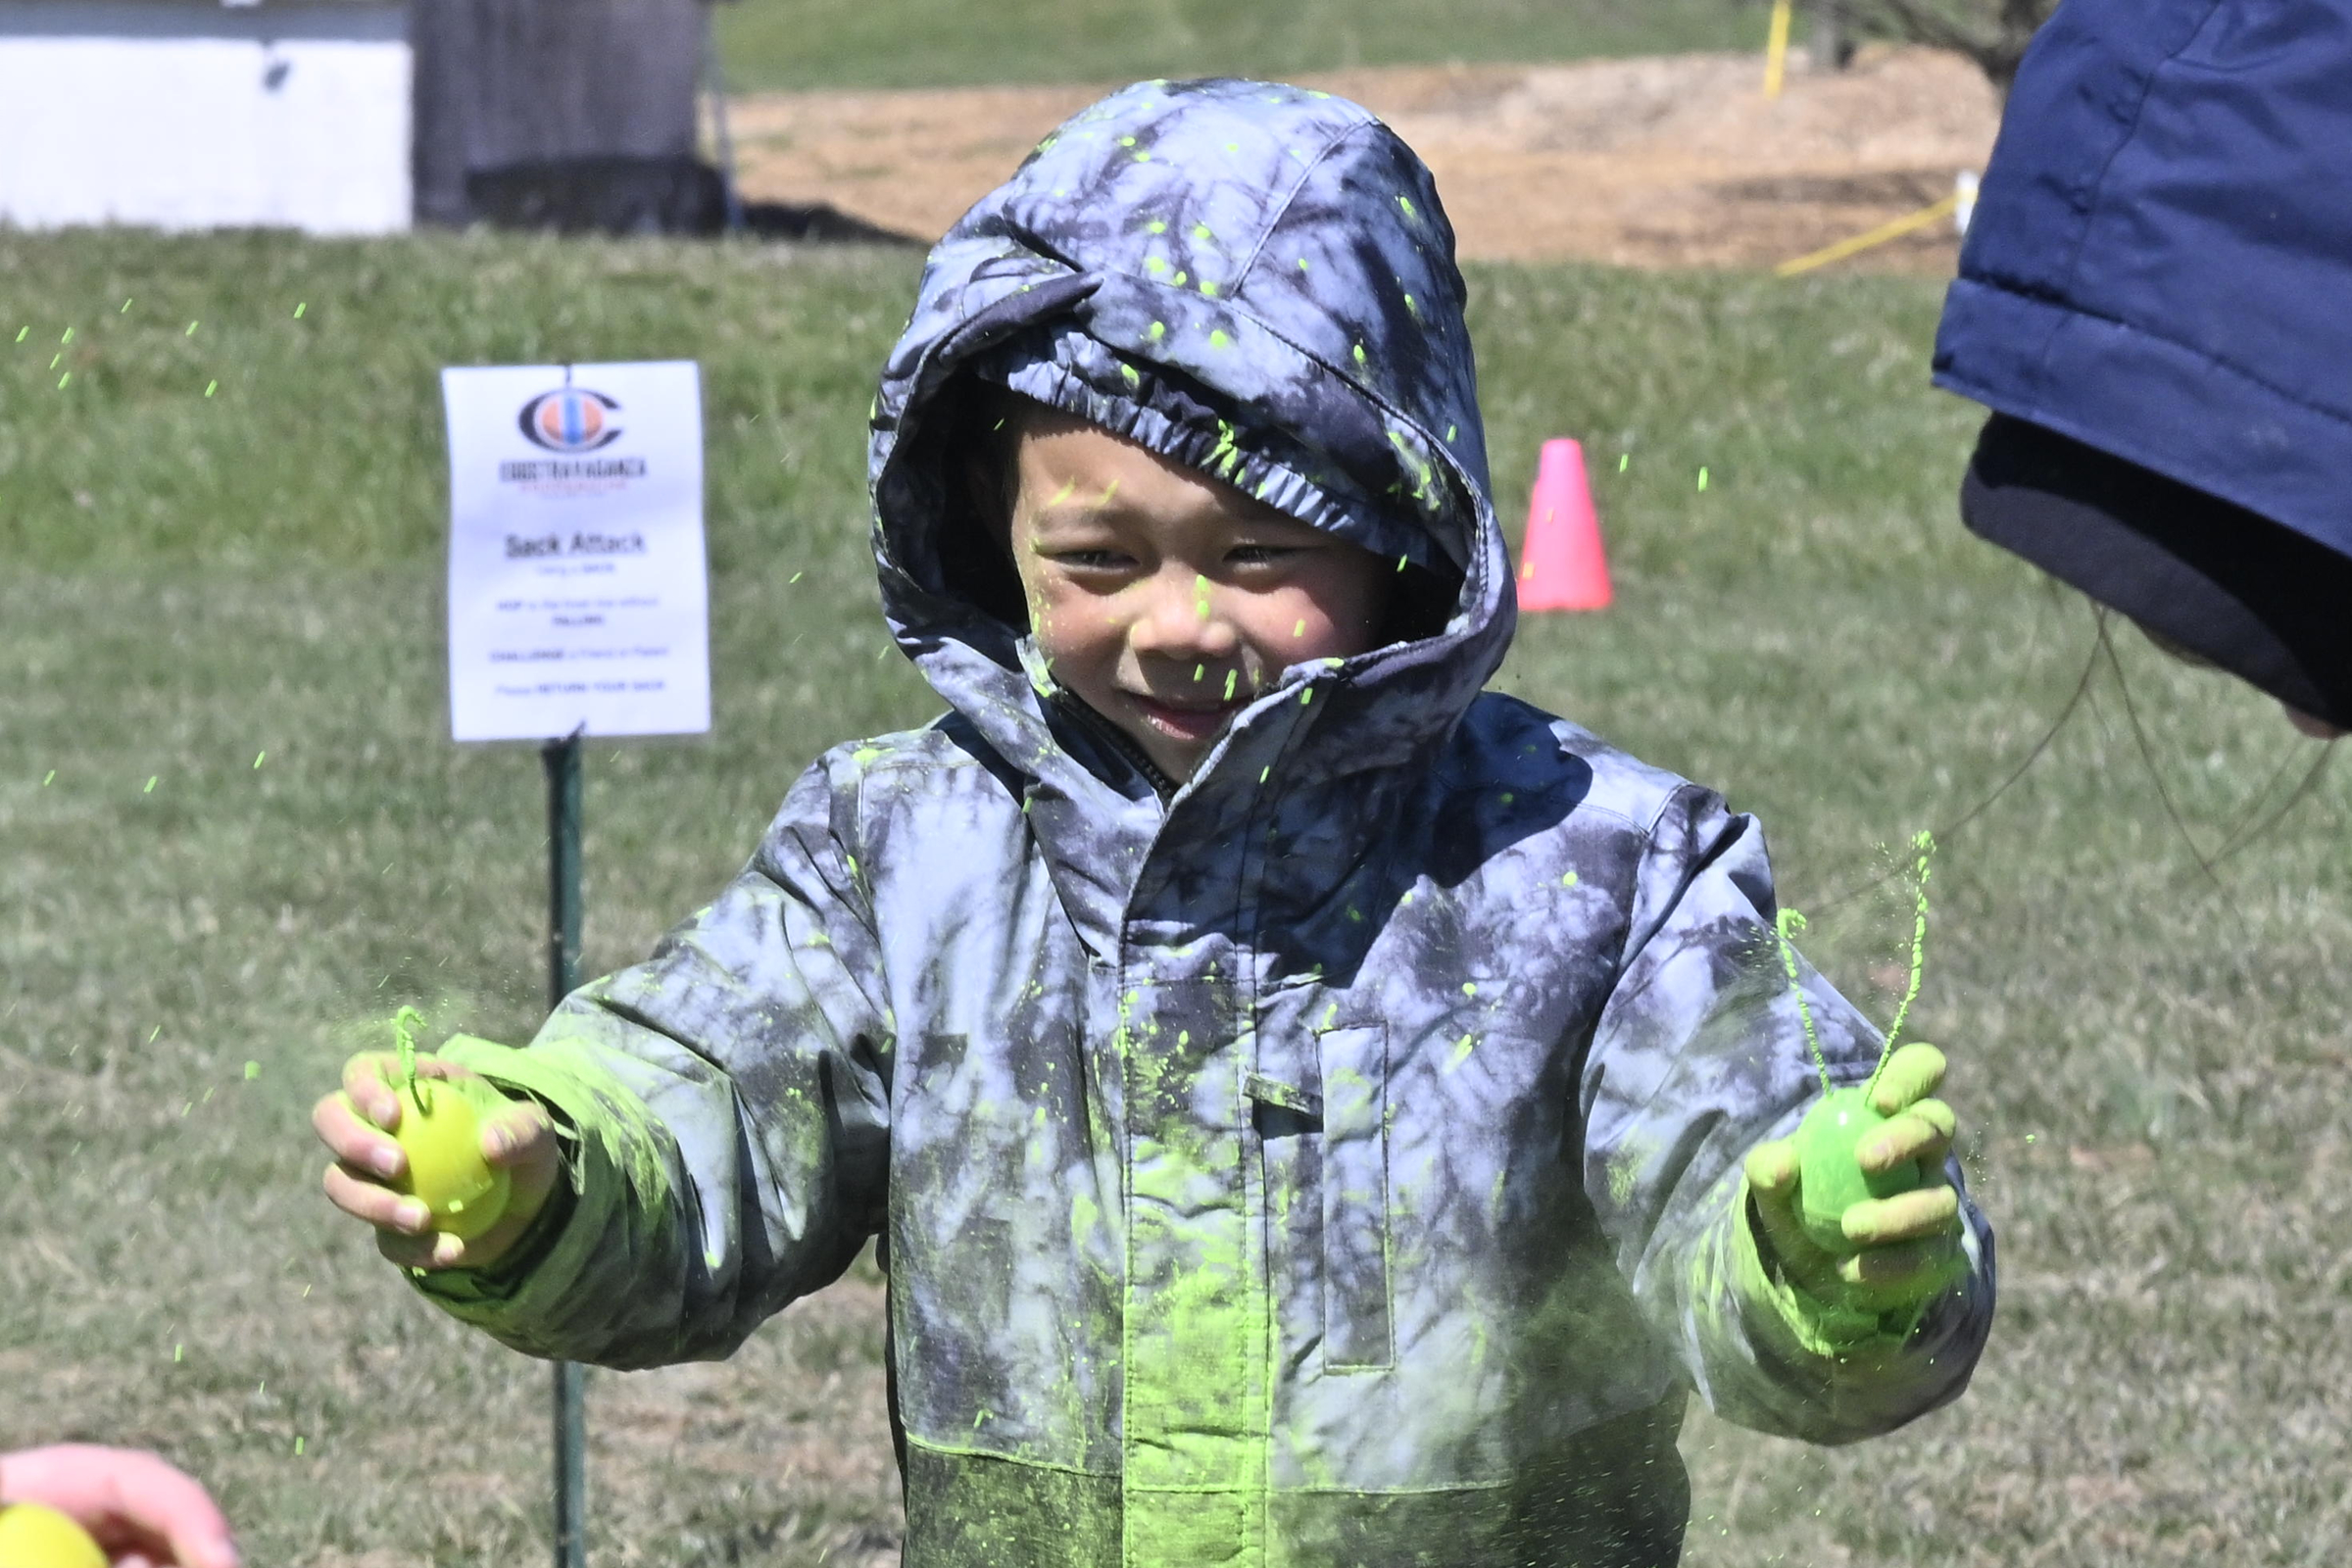 Micah Lin, 7, plays with powdered filled plastic eggs during the Coppermine Eggstravaganza at Cascade Park in Hampstead. (Thomas Walker/Freelance)